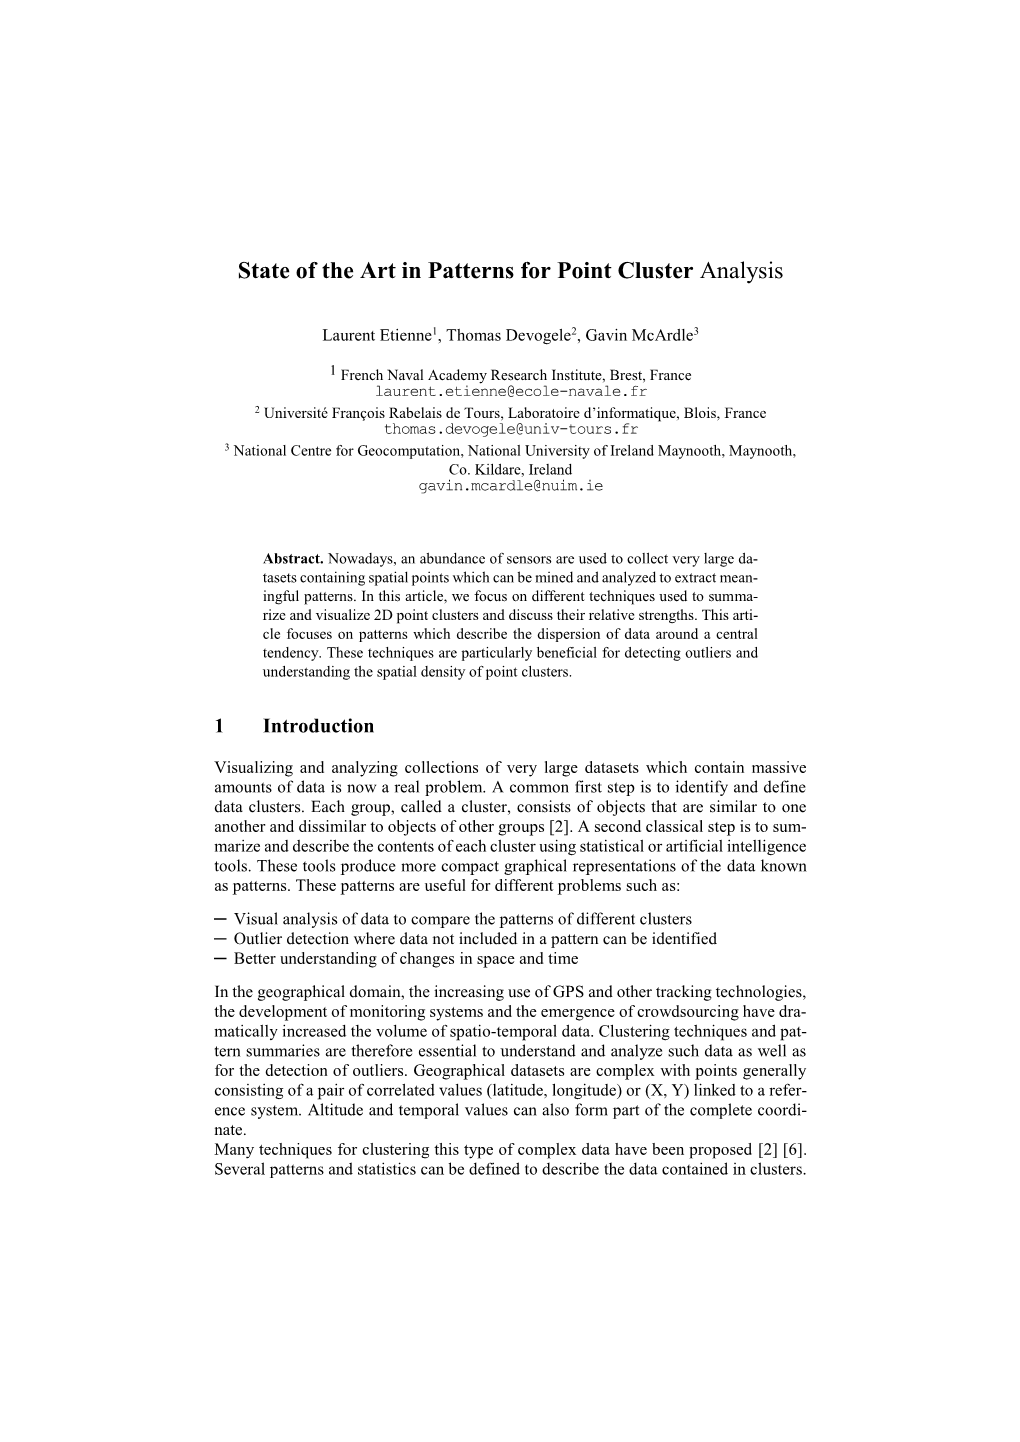 State of the Art in Patterns for Point Cluster Analysis